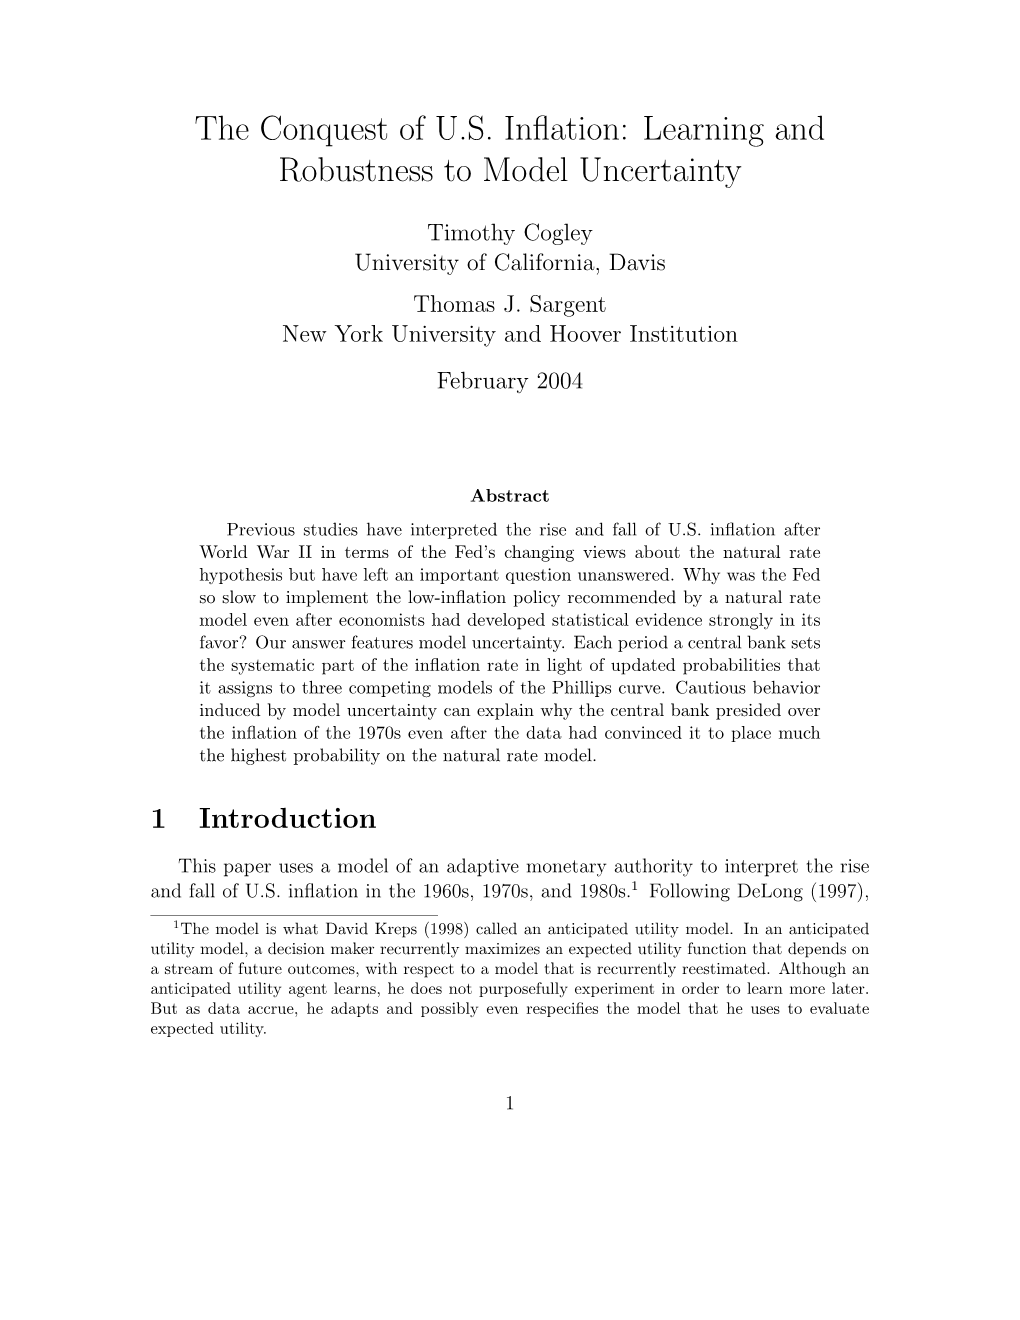 The Conquest of U.S. Inflation: Learning and Robustness to Model Uncertainty